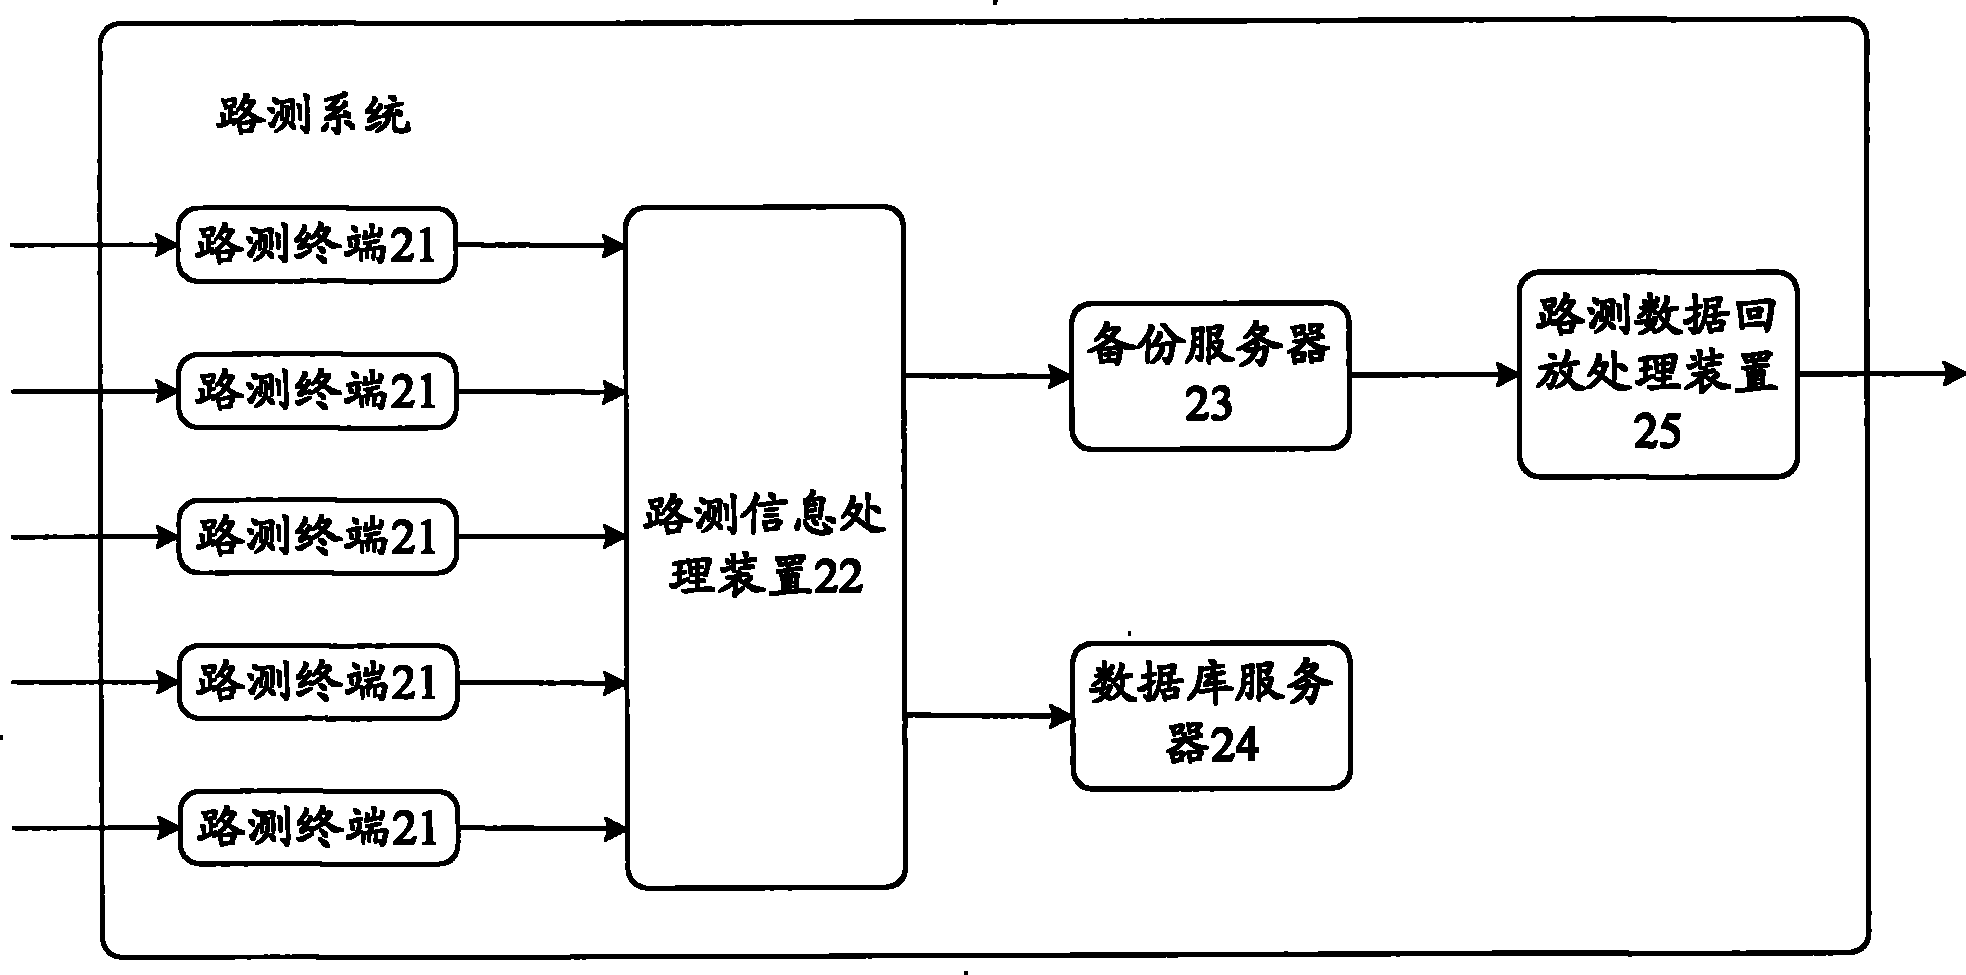 Road test information processing method and device